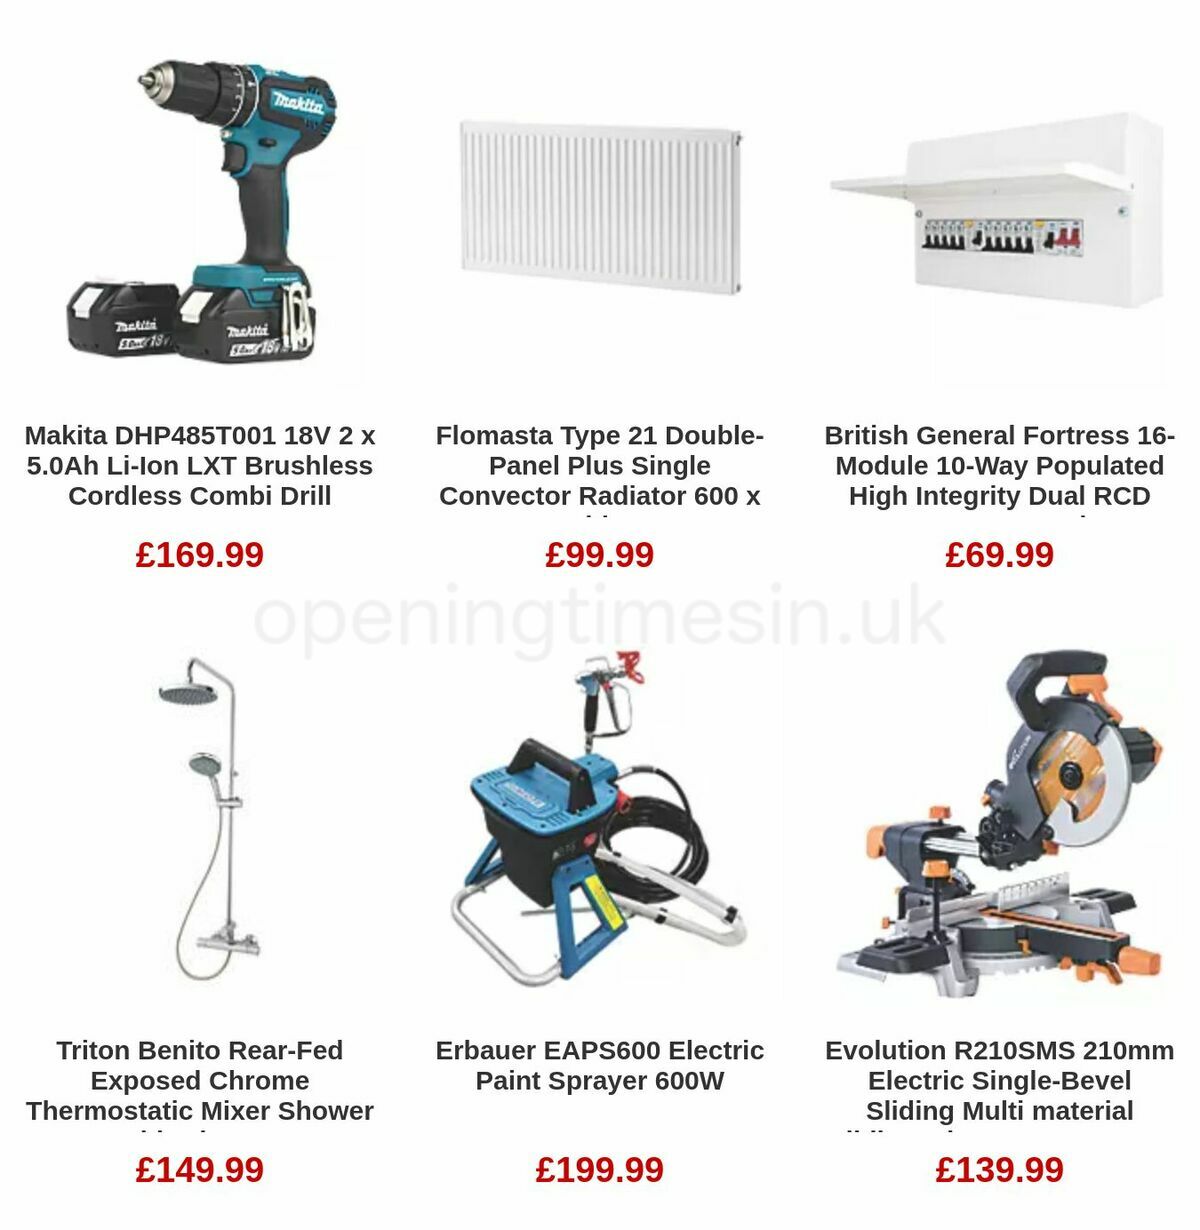 Screwfix Offers from 8 May